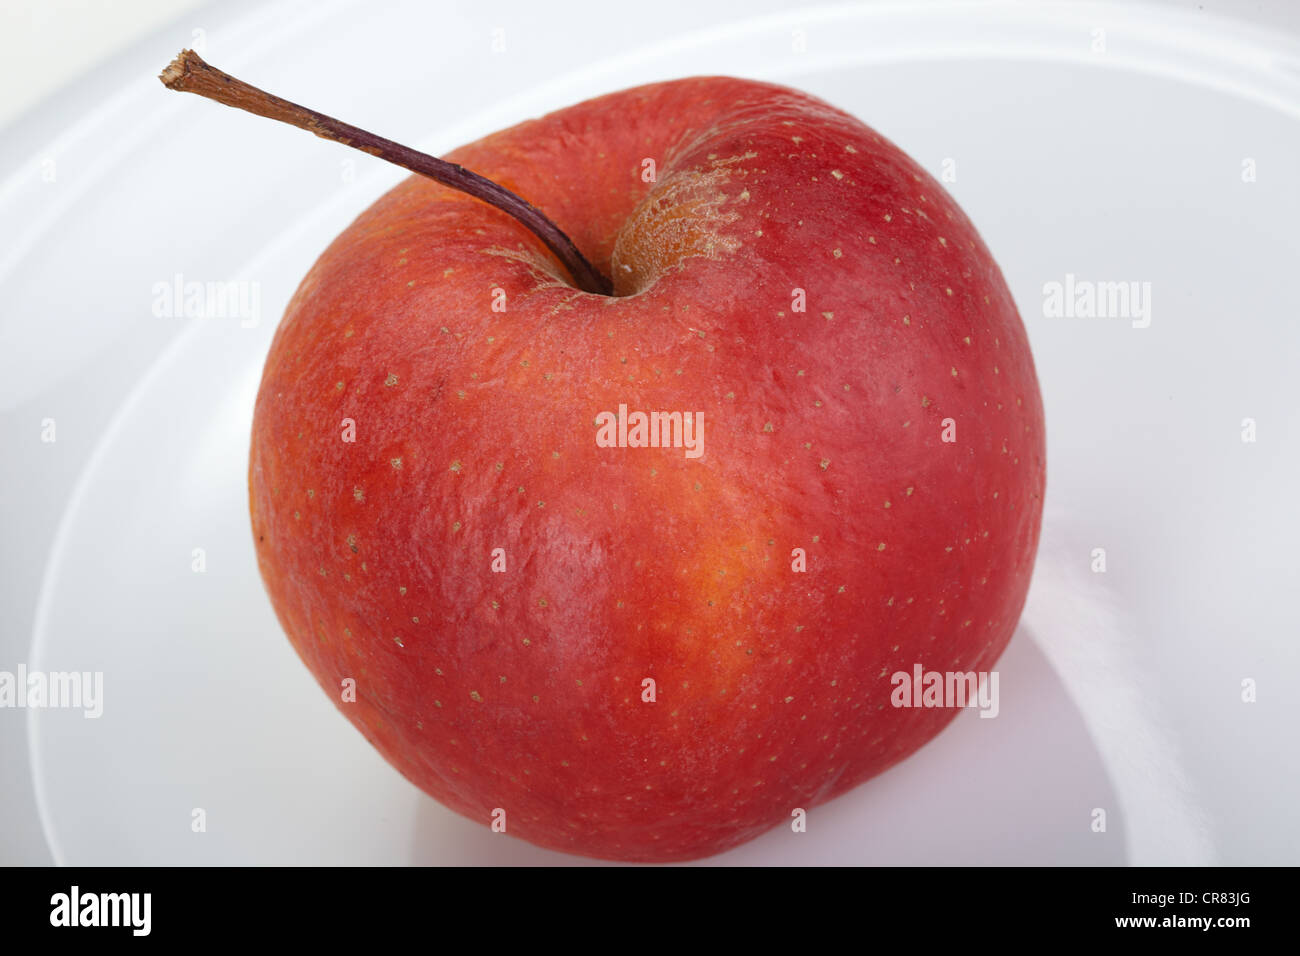 Red Apple (Malus domestica), Boskoop variety on a white plate Stock Photo